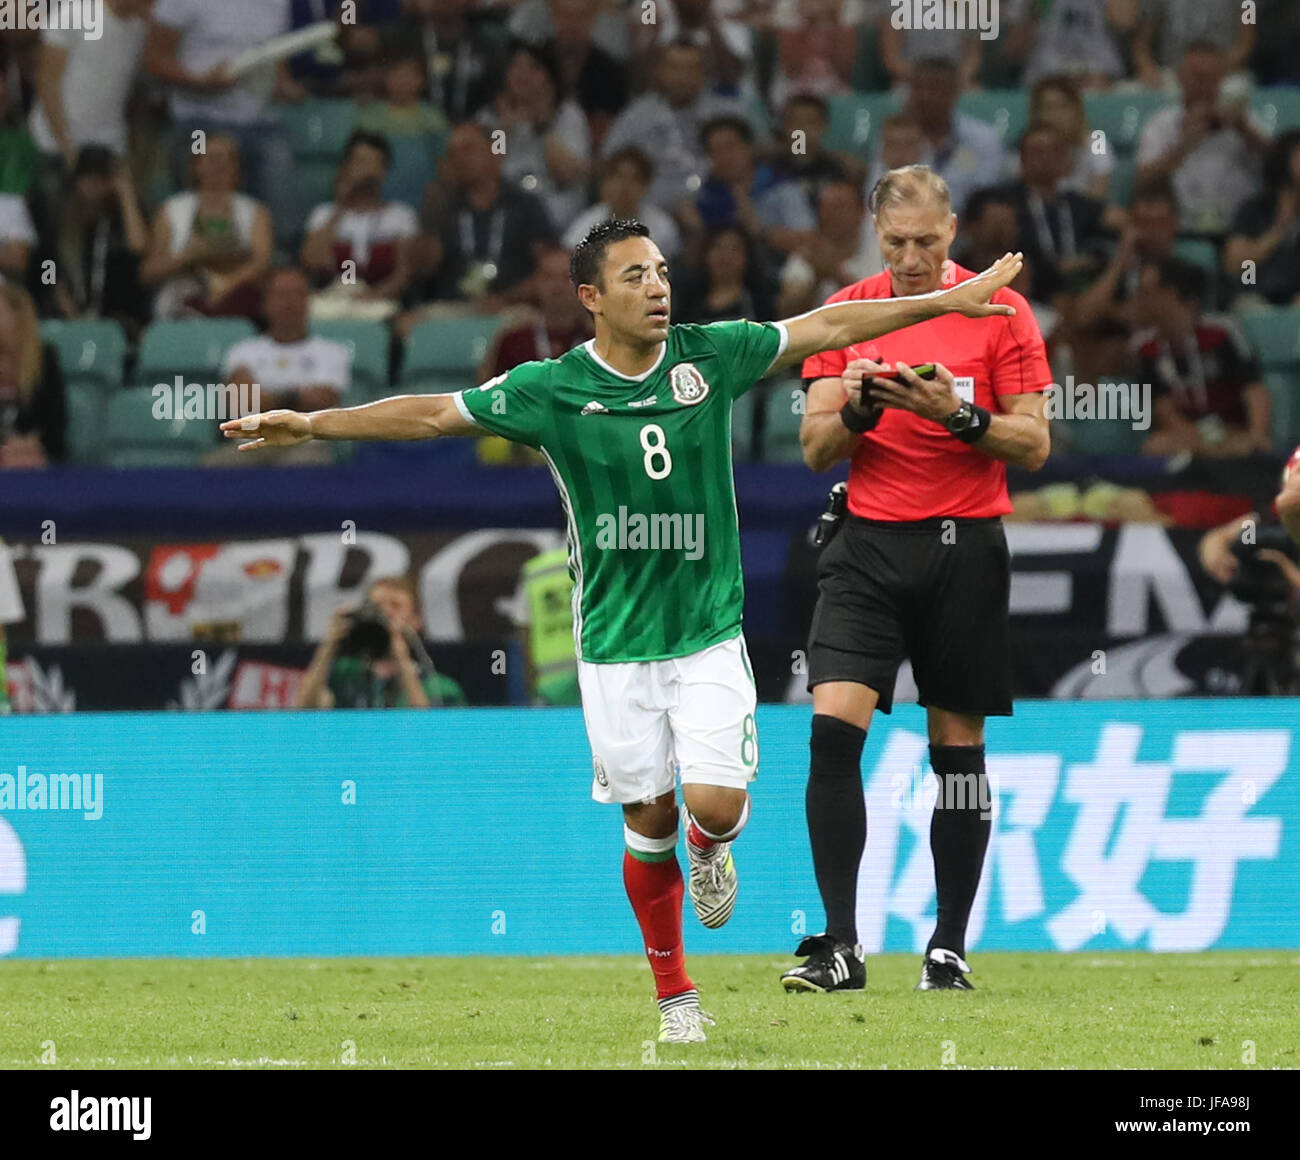 Sochi, Russia. 29th June, 2017. Marco Fabian (L) of Mexico celebrates his goal during the semifinal match of the 2017 FIFA Confederations Cup against Germany in Sochi, Russia, June 29, 2017. Mexico lost 1-4. Credit: Xu Zijian/Xinhua/Alamy Live News Stock Photo